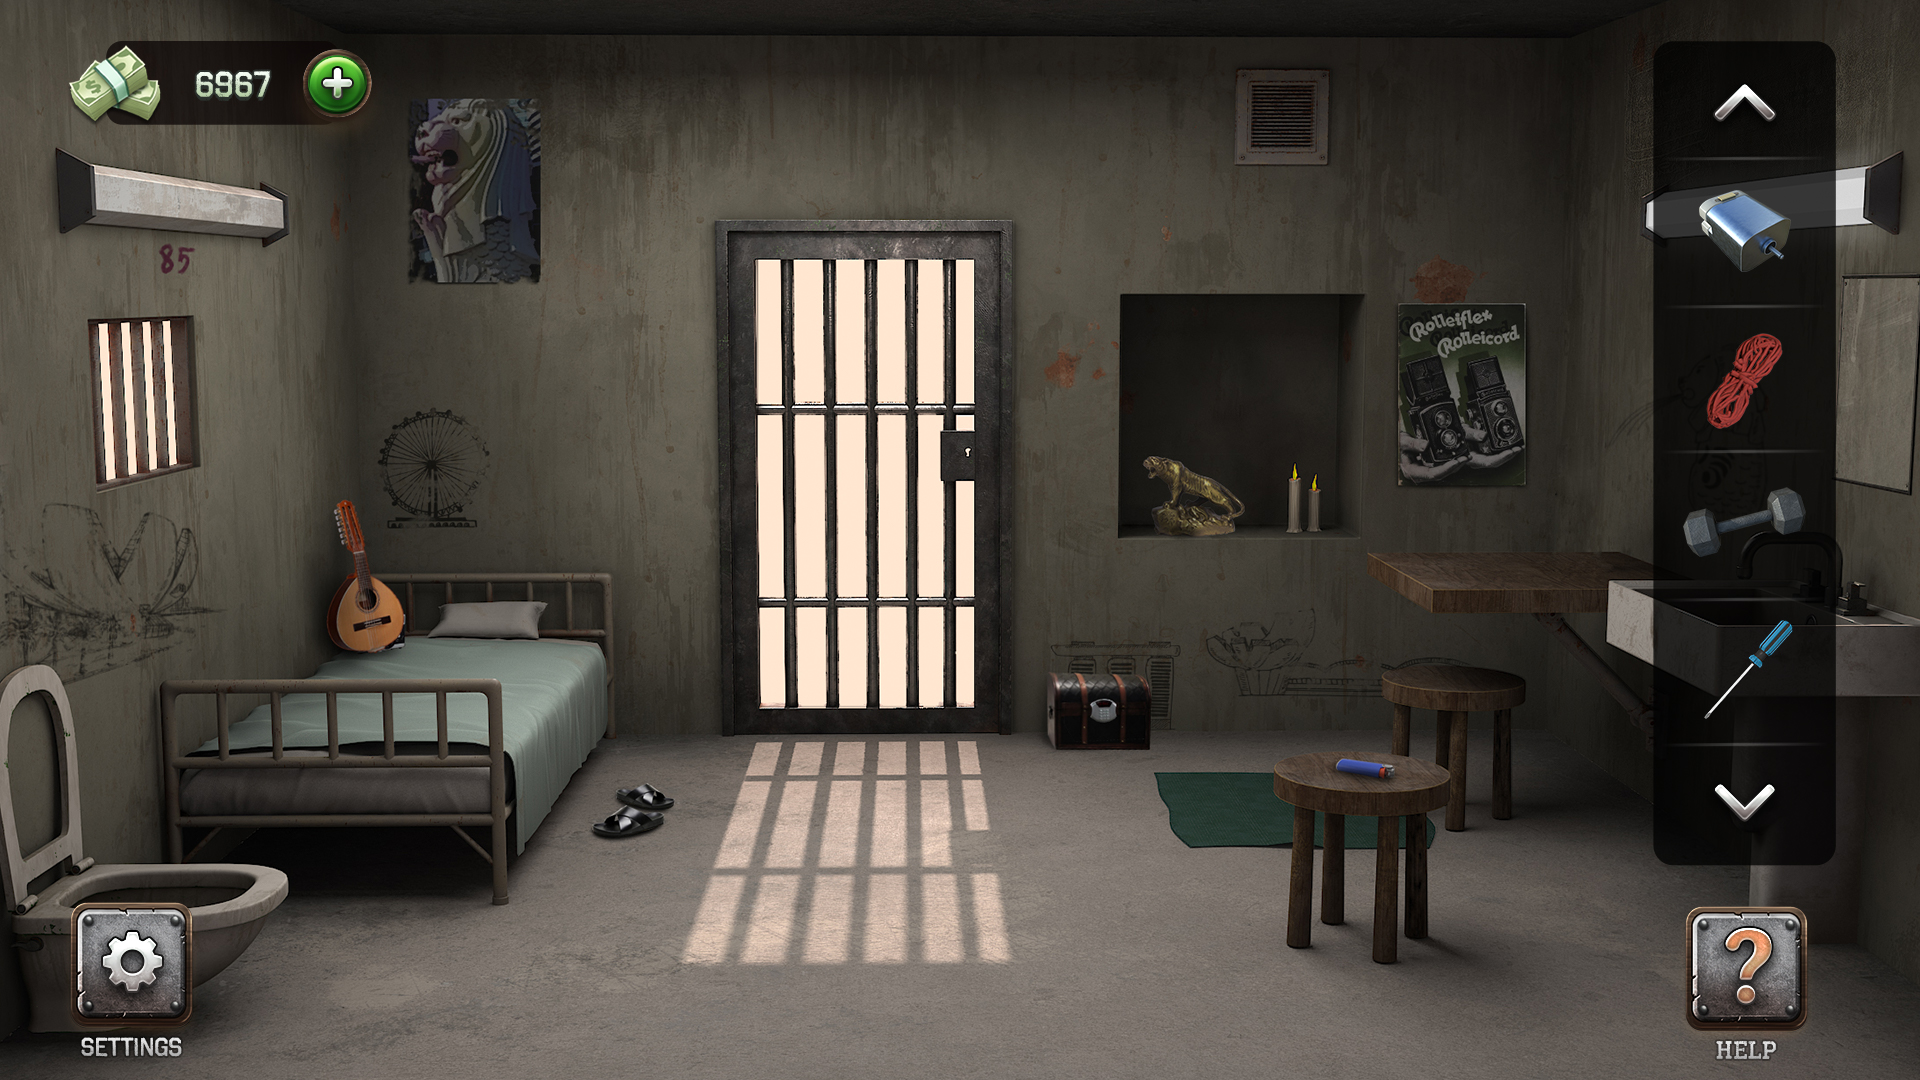 Download and play 100 Doors - Escape from Prison on PC & Mac (Emulator)